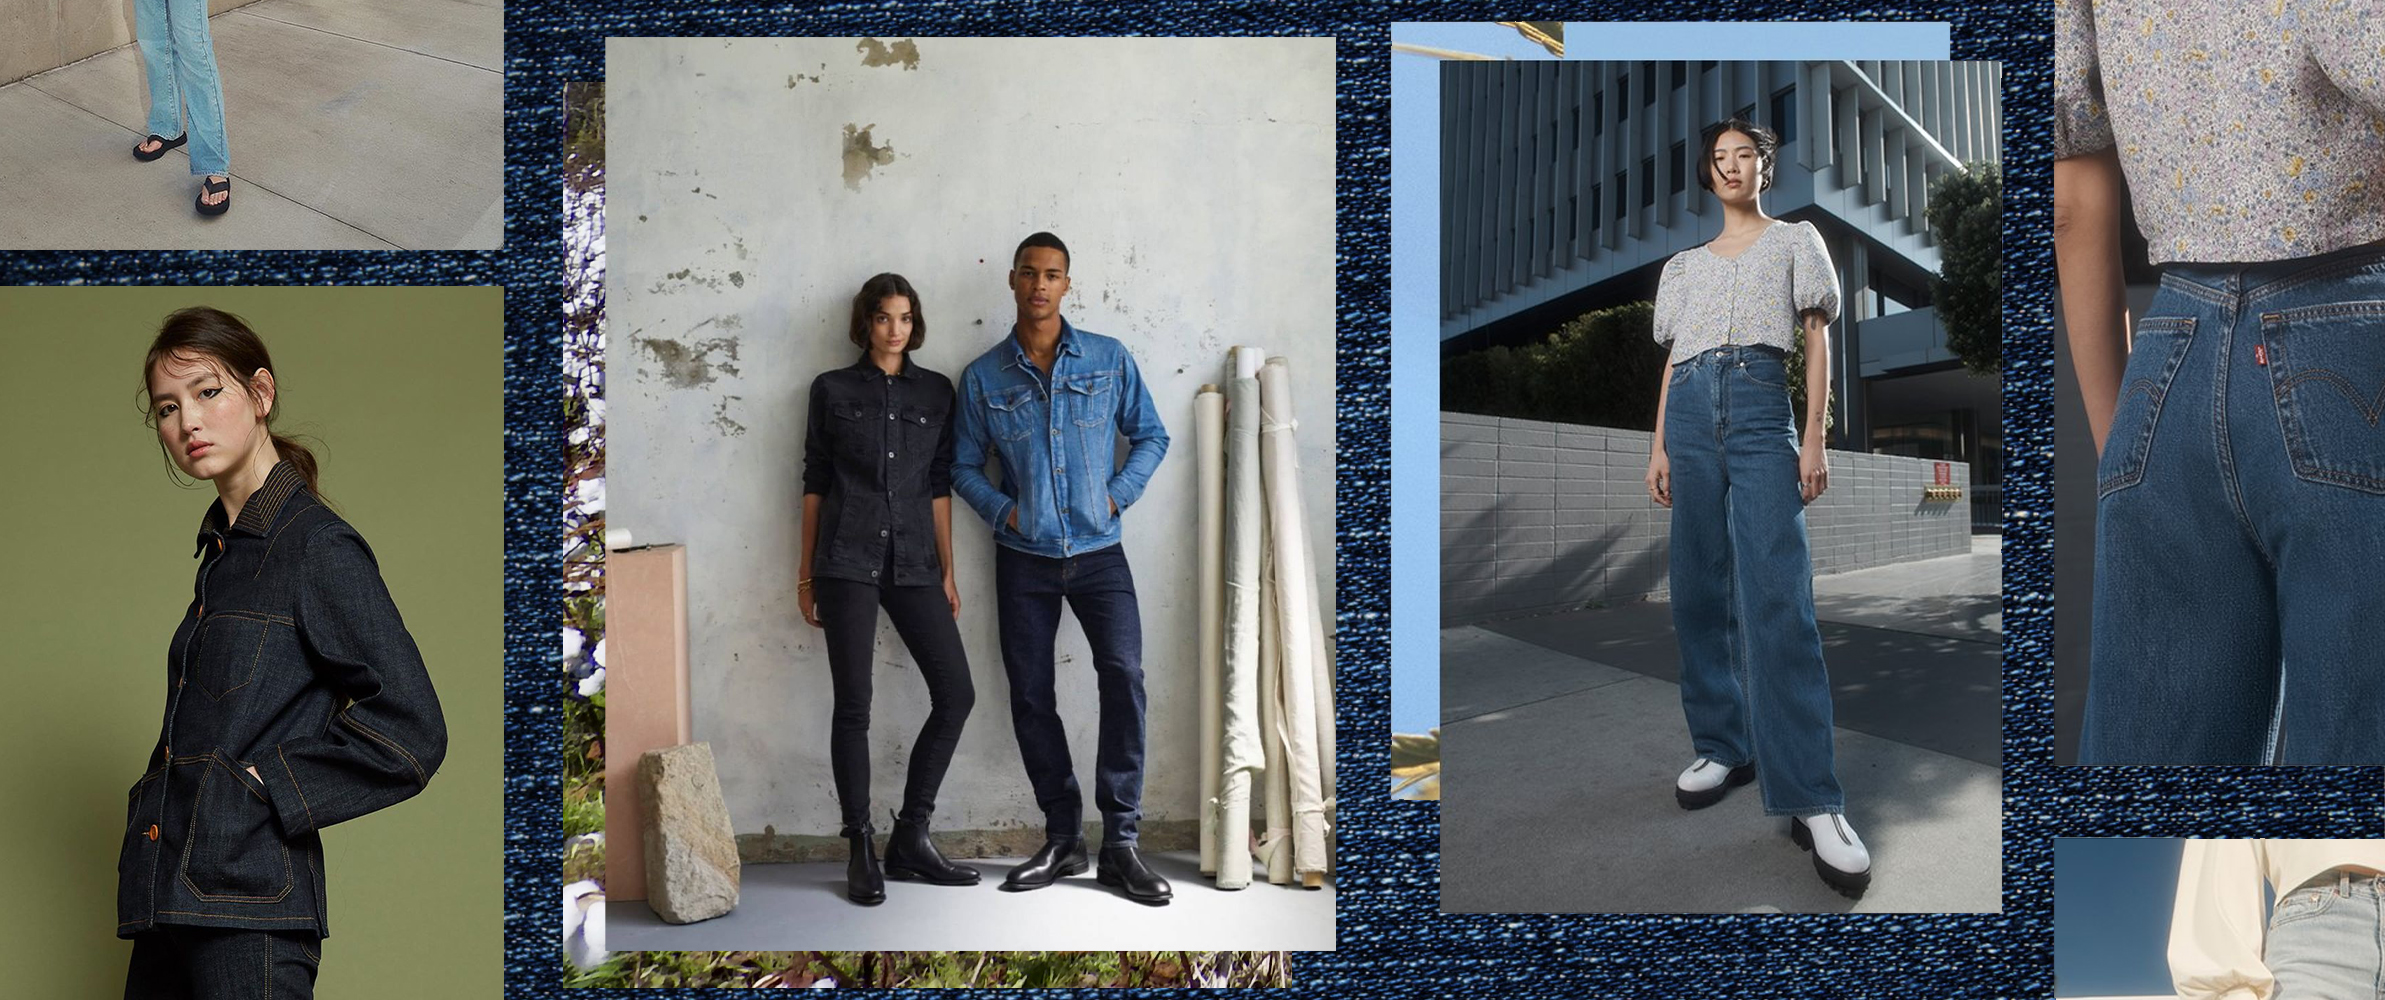 levis sustainable